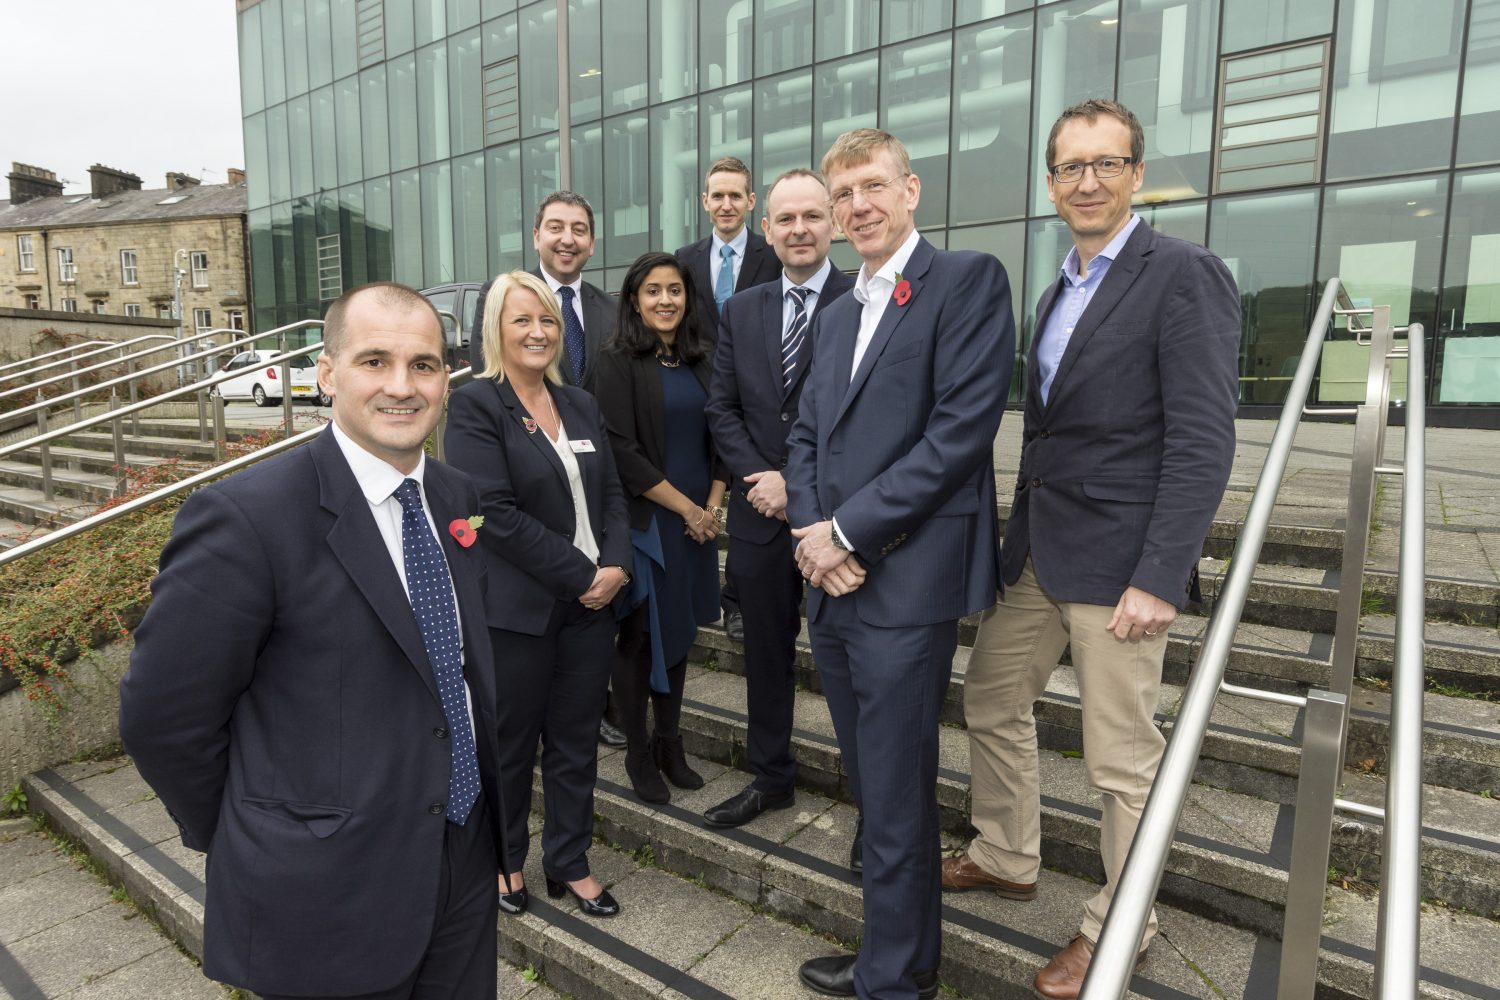 Eight people standing on externa steps. Man standing by himself is wearing a blue suit with a Rembrance poppy on it has a blue patterned tie on, there are two women in the group. One woman has blonde hair and is wearing a suit and the other woman has dark mid length hair.